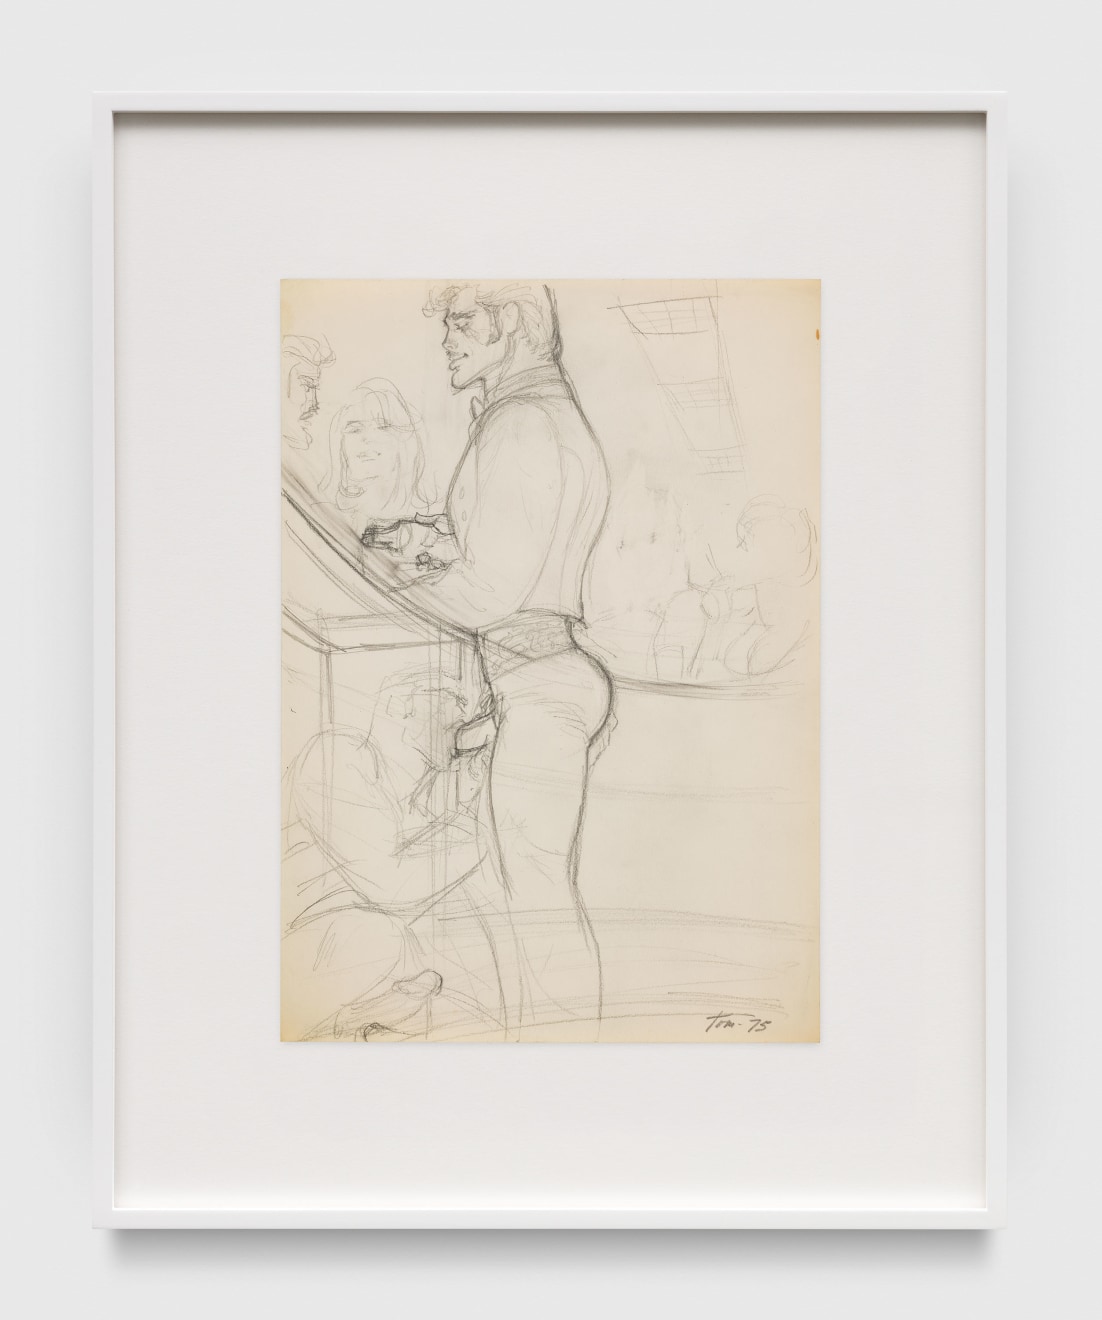 Tom of Finland, Untitled (Preparatory Drawing), c. 1975